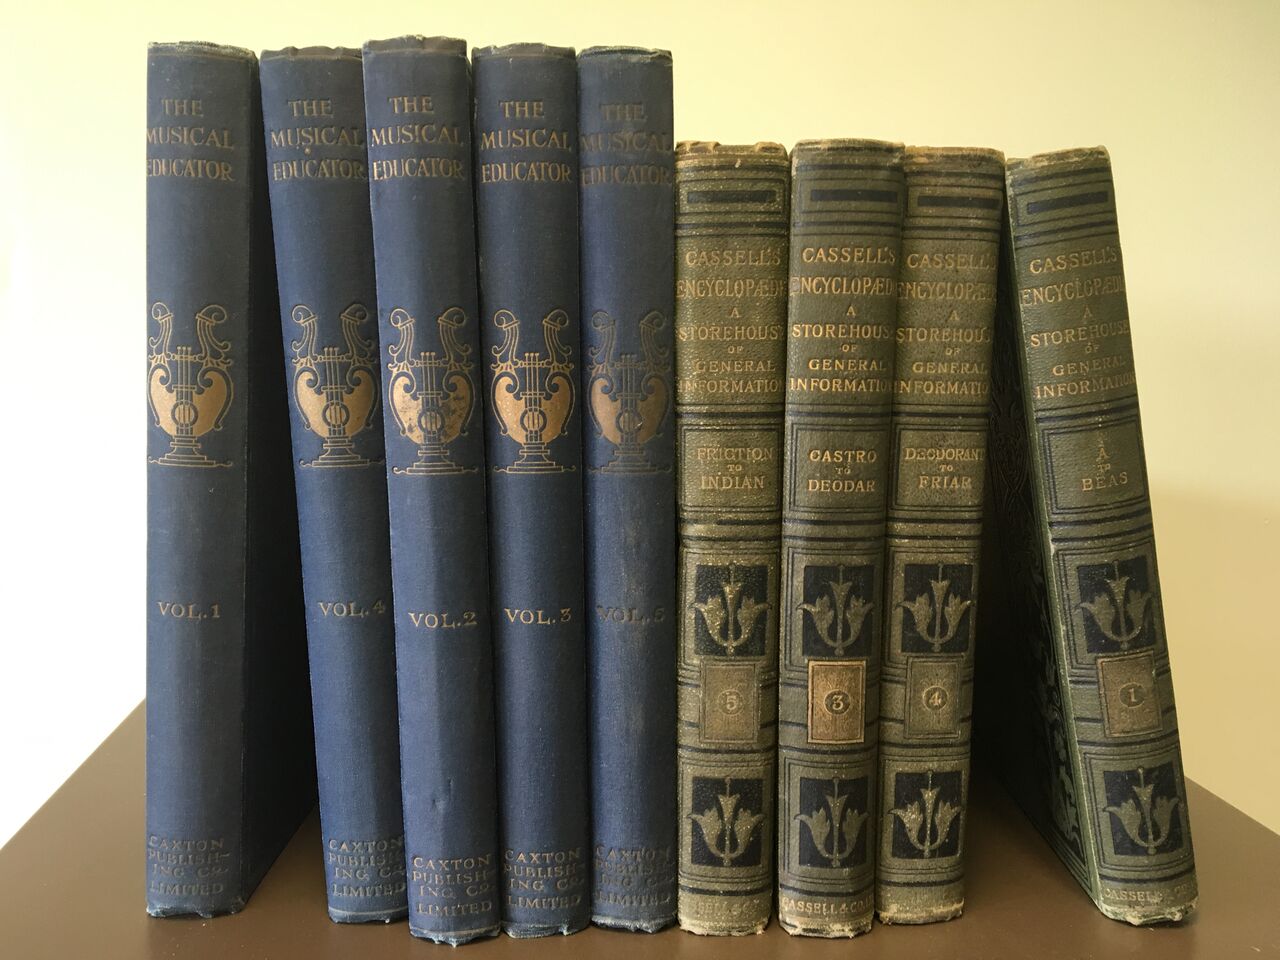 GROUP OF ANTIQUE ENCYLOPEDIA AND REFERENCE BOOKS - CASSELL'S AND THE MUSICAL EDUCATOR (9). FREE UK